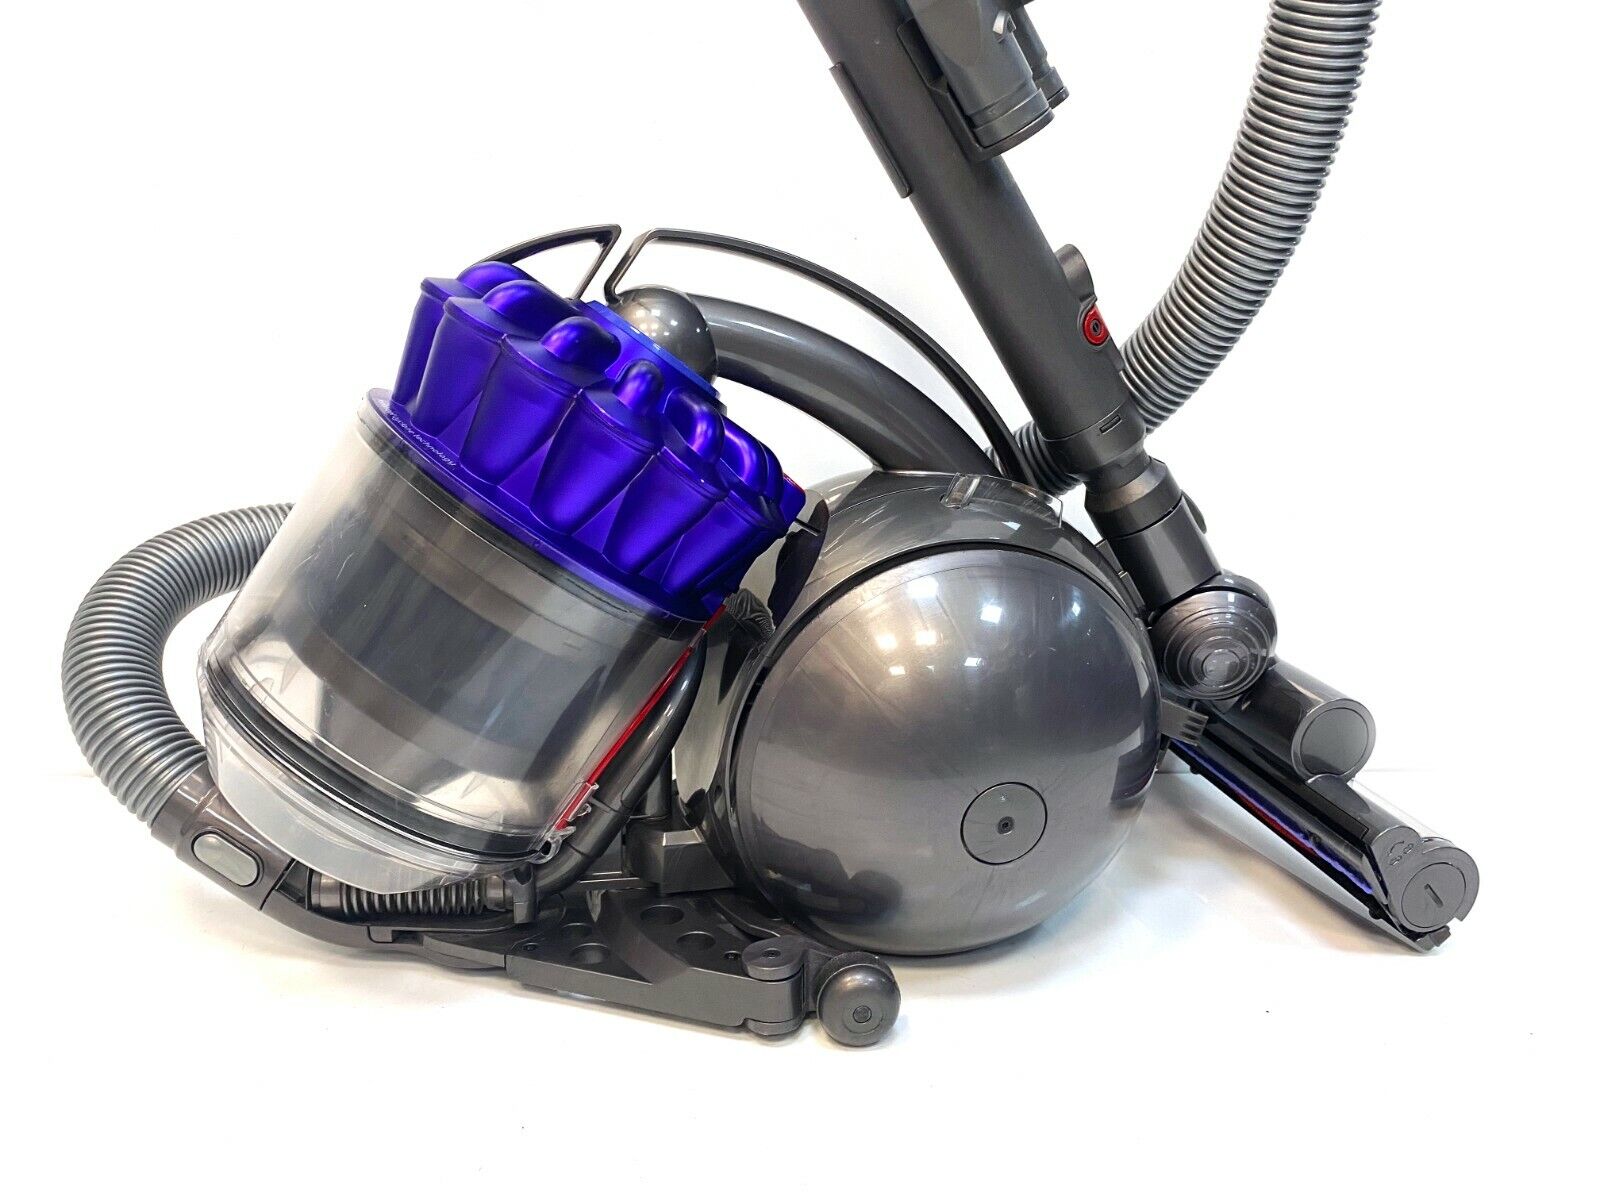 Dyson Vacuum Cleaner: How It Works